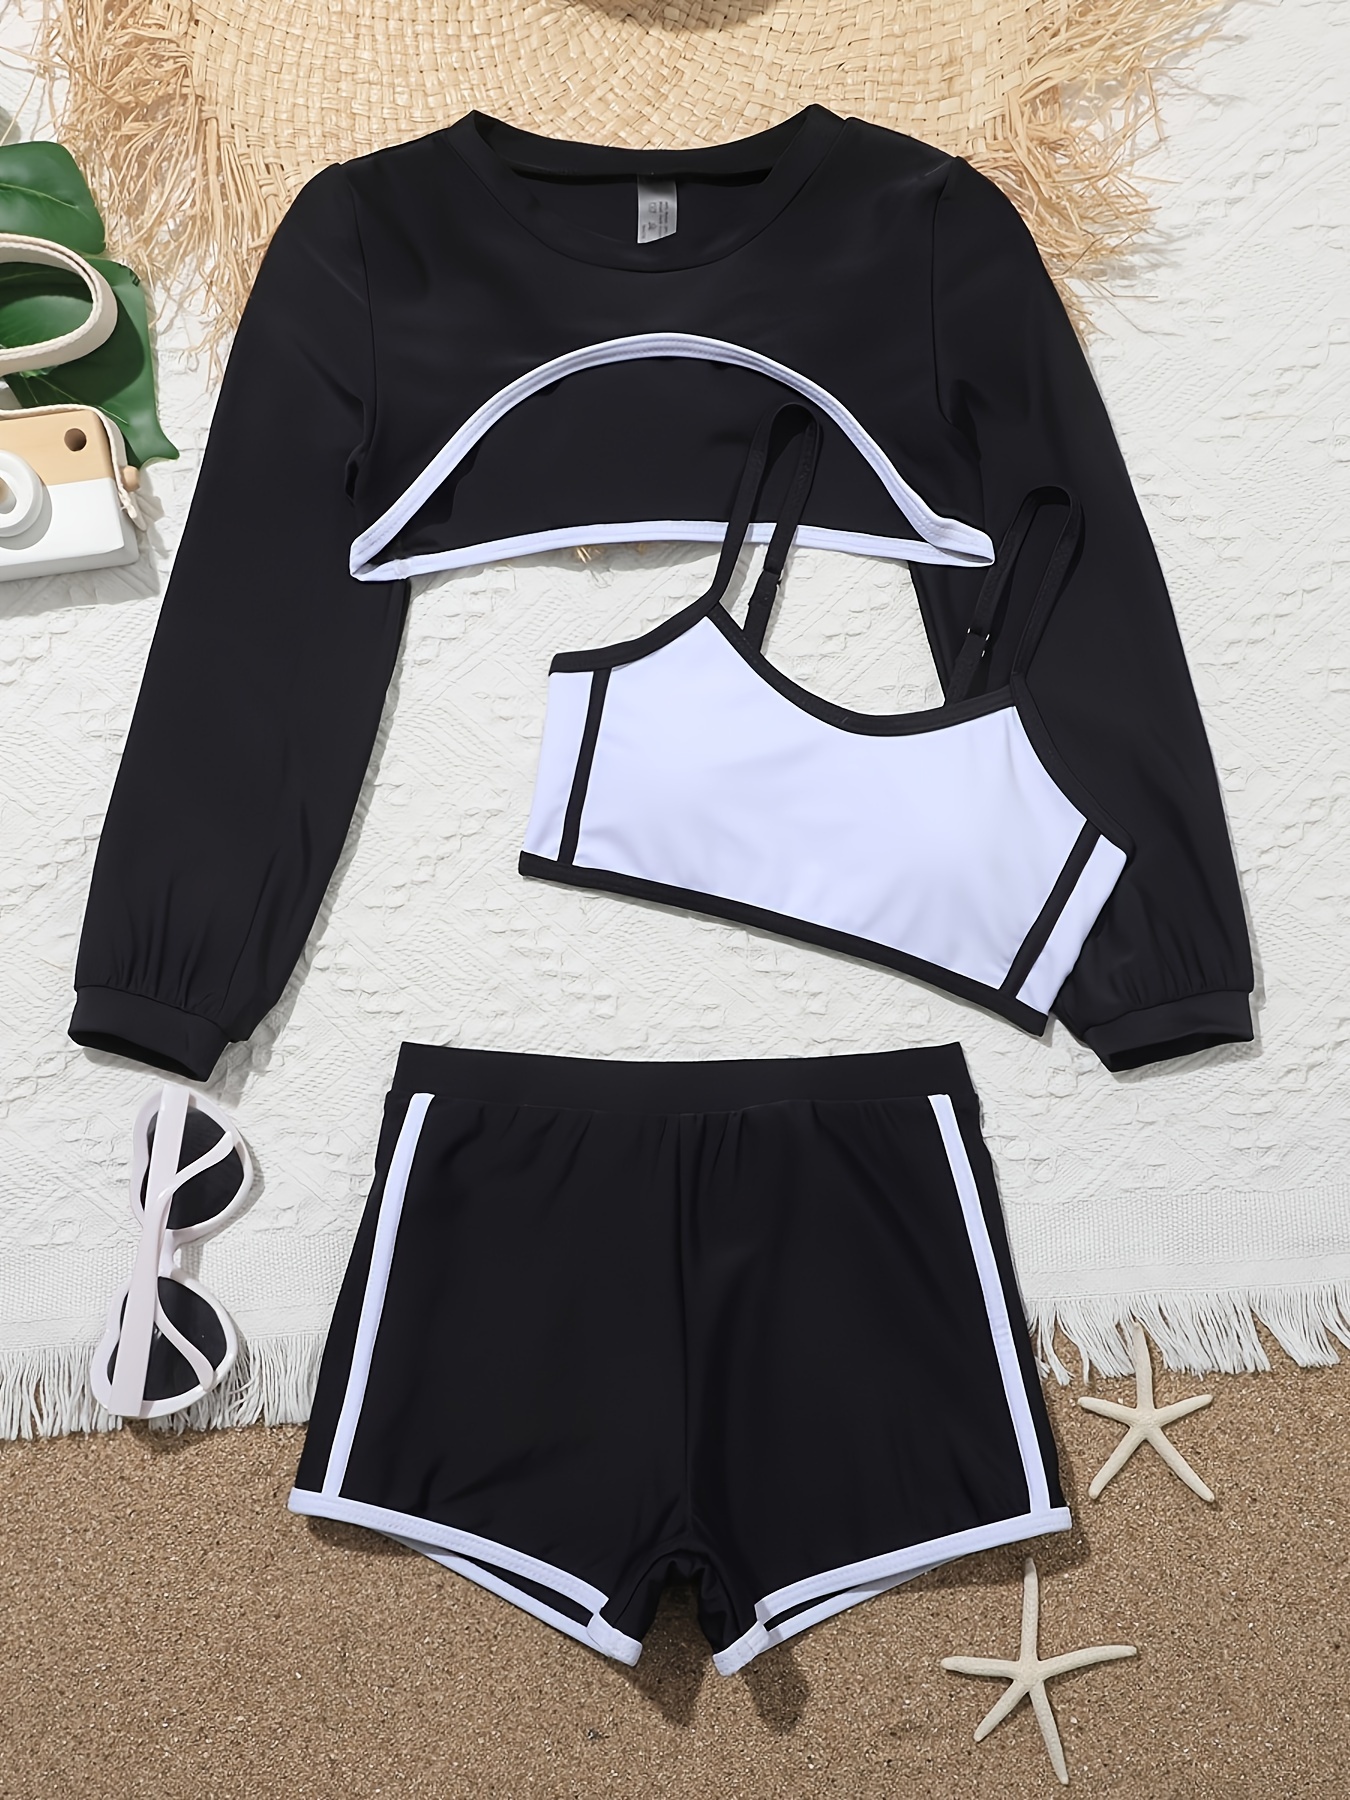 Elegant Girls 2pcs Swimsuit Set, Splicing Top + Shorts Set Bathing Suit  Summer Clothes For Beach Vacation Surfing Sports Gift